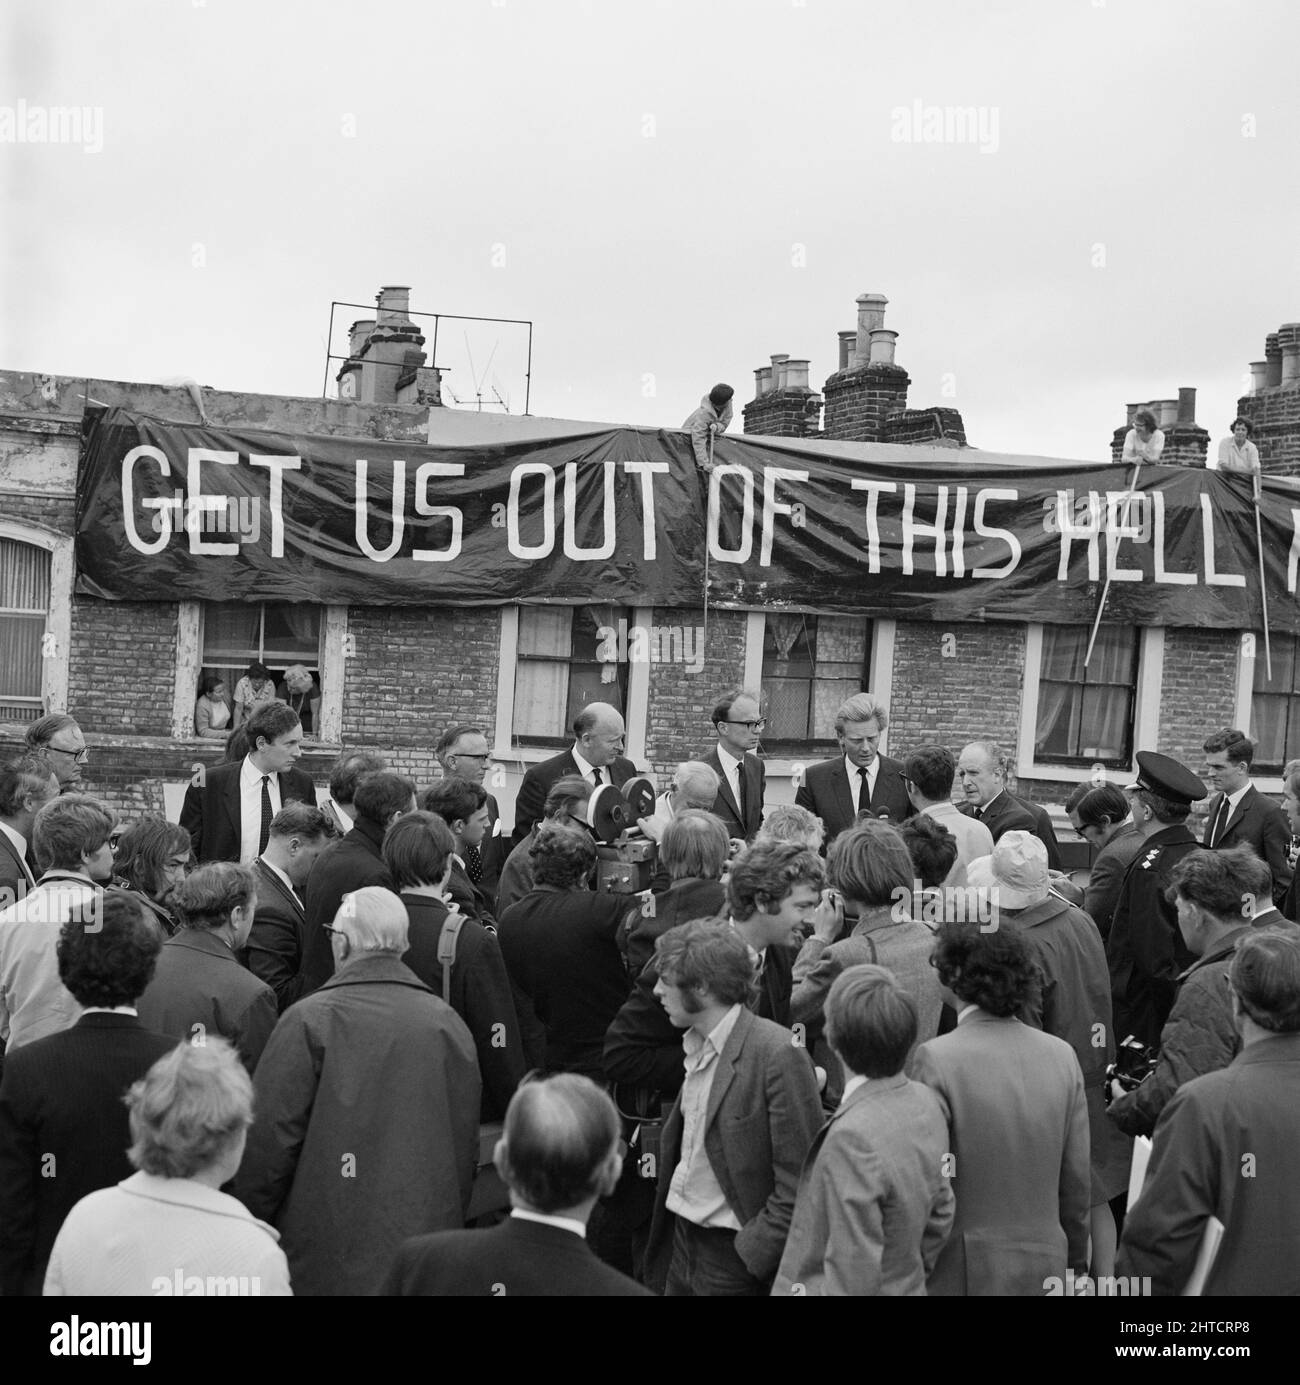 Westway Flyover, A40, Kensington and Chelsea, London, 28/07/1970. A crowd gathered beside a journalist interviewing Michael Heseltine at the opening of the Westway Flyover, with a protest banner draped in the background. Michael Heseltine was Parliamentary Secretary to the Ministry of Transport, and deputised for the Minister John Peyton to cut the tape for the opening of the Westway Flyover. Acklam Road was the focus of protests against the Westway by local residents. Houses along one side of the street had been demolished to make way for the flyover. At a reception held earlier that day at t Stock Photo